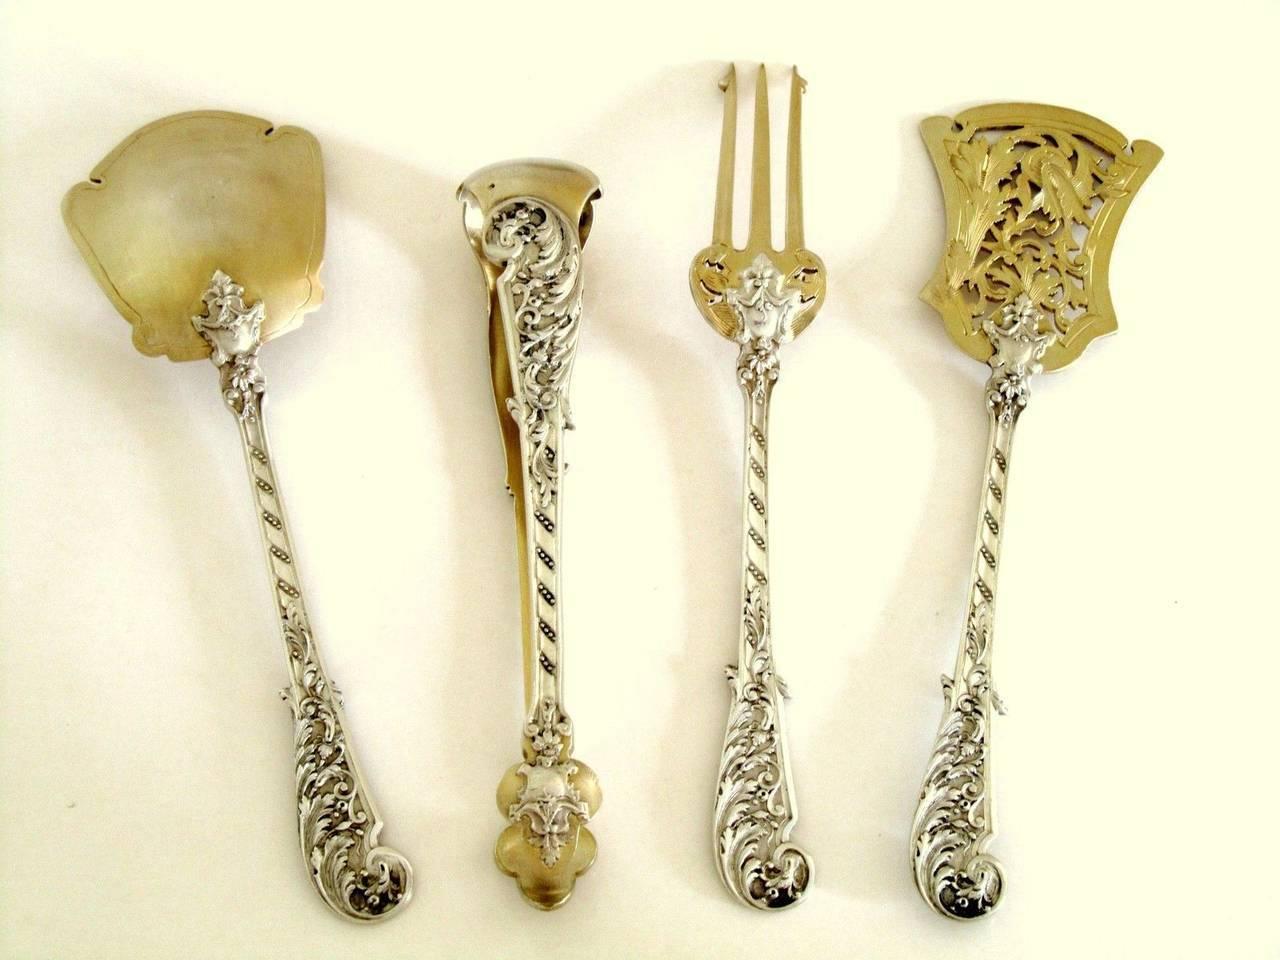 Rococo Soufflot French Sterling Silver 18-Karat Gold Dessert Hors D'oeuvre Set Box For Sale